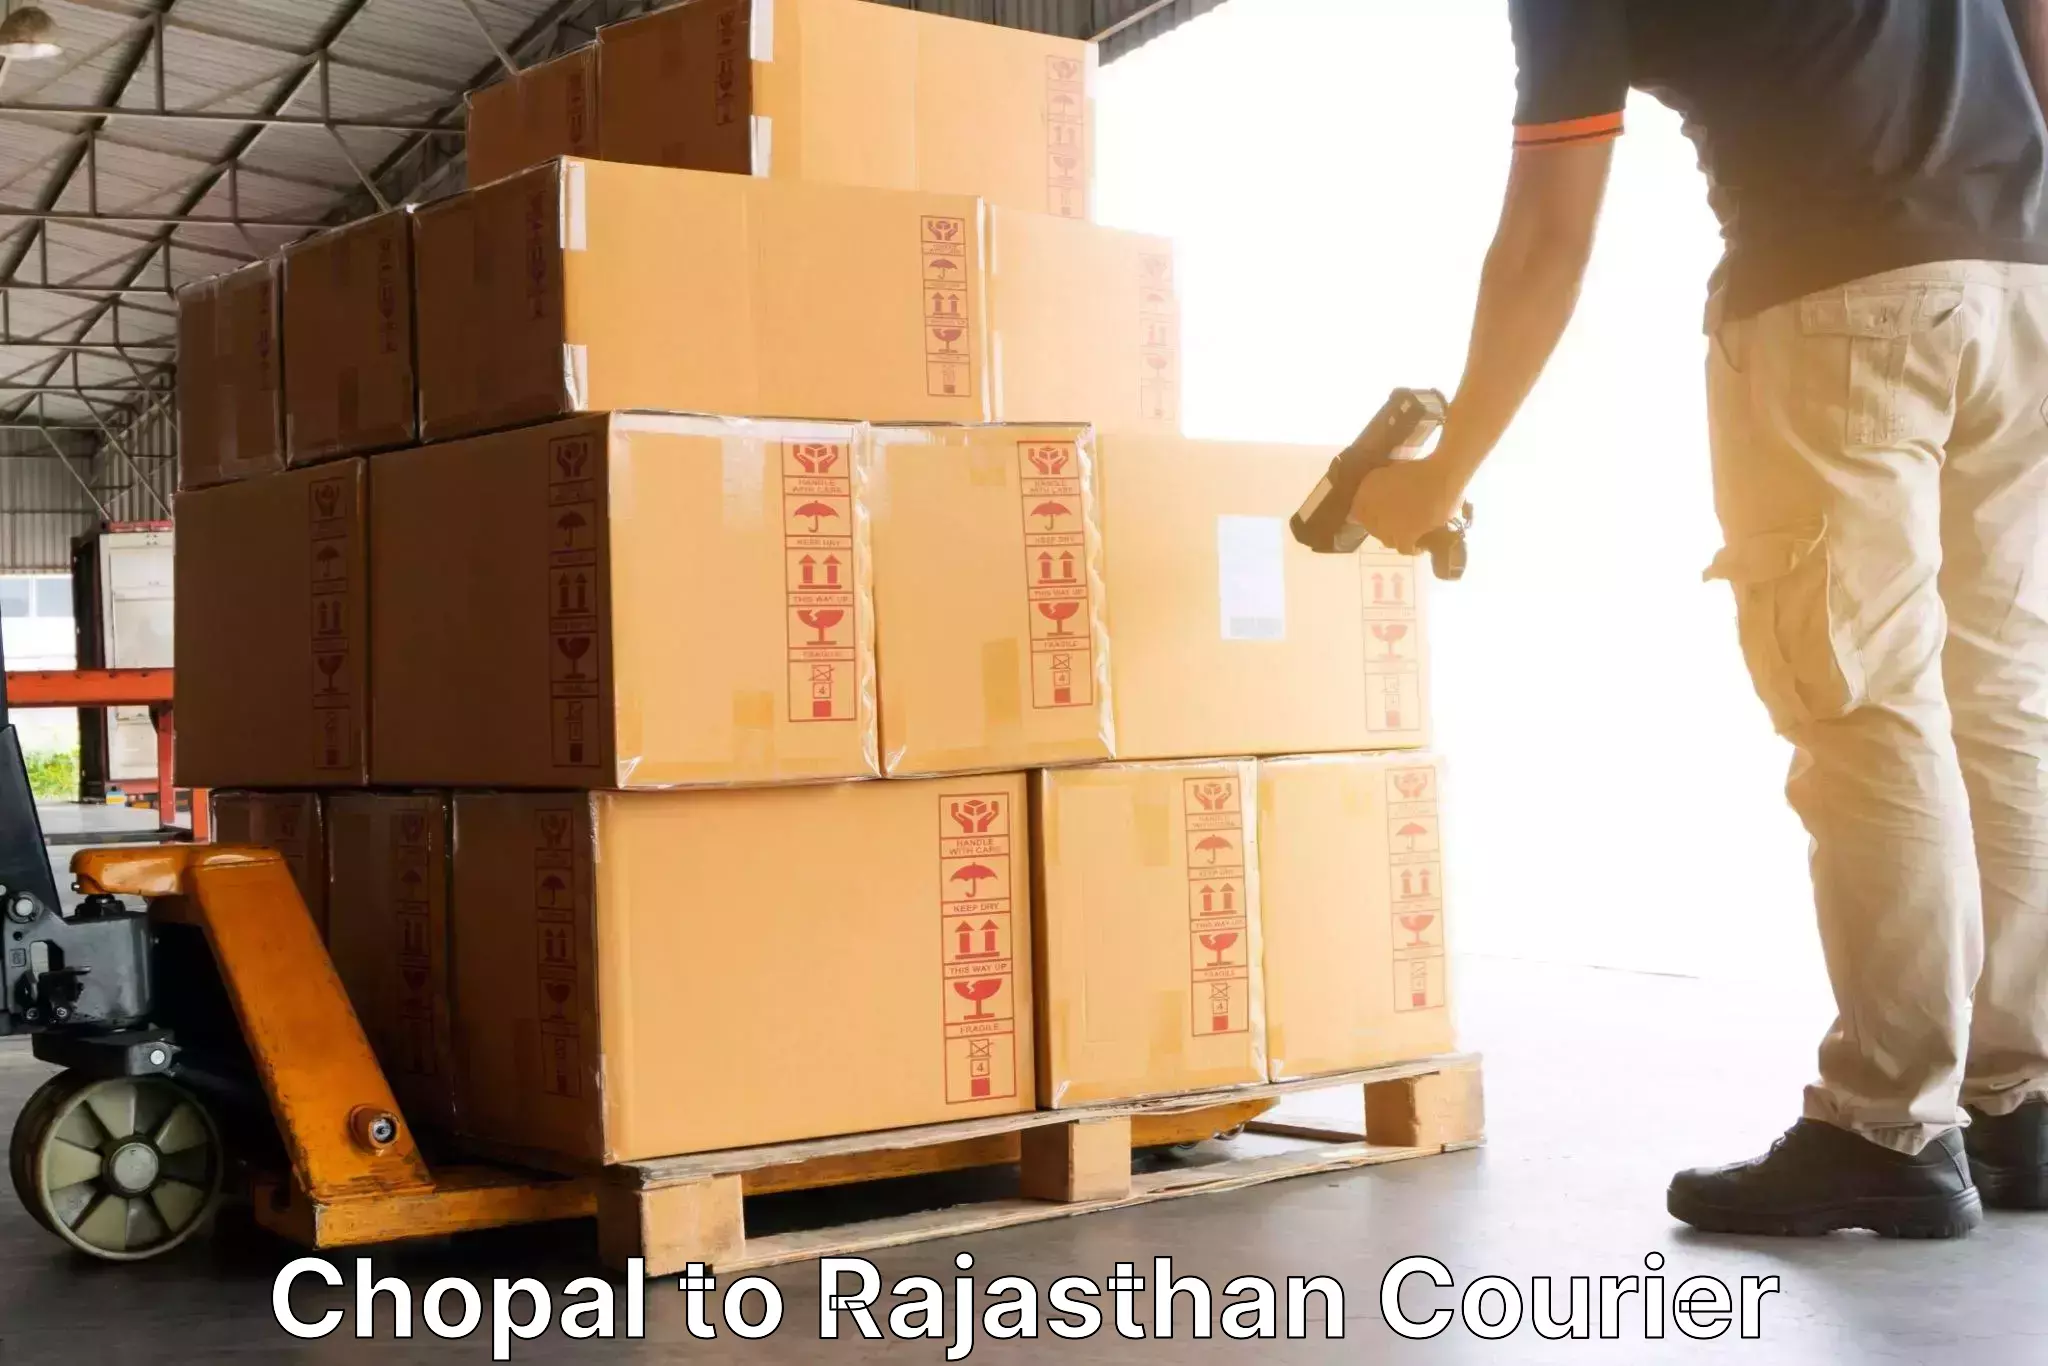 Same-day delivery options Chopal to Hanumangarh